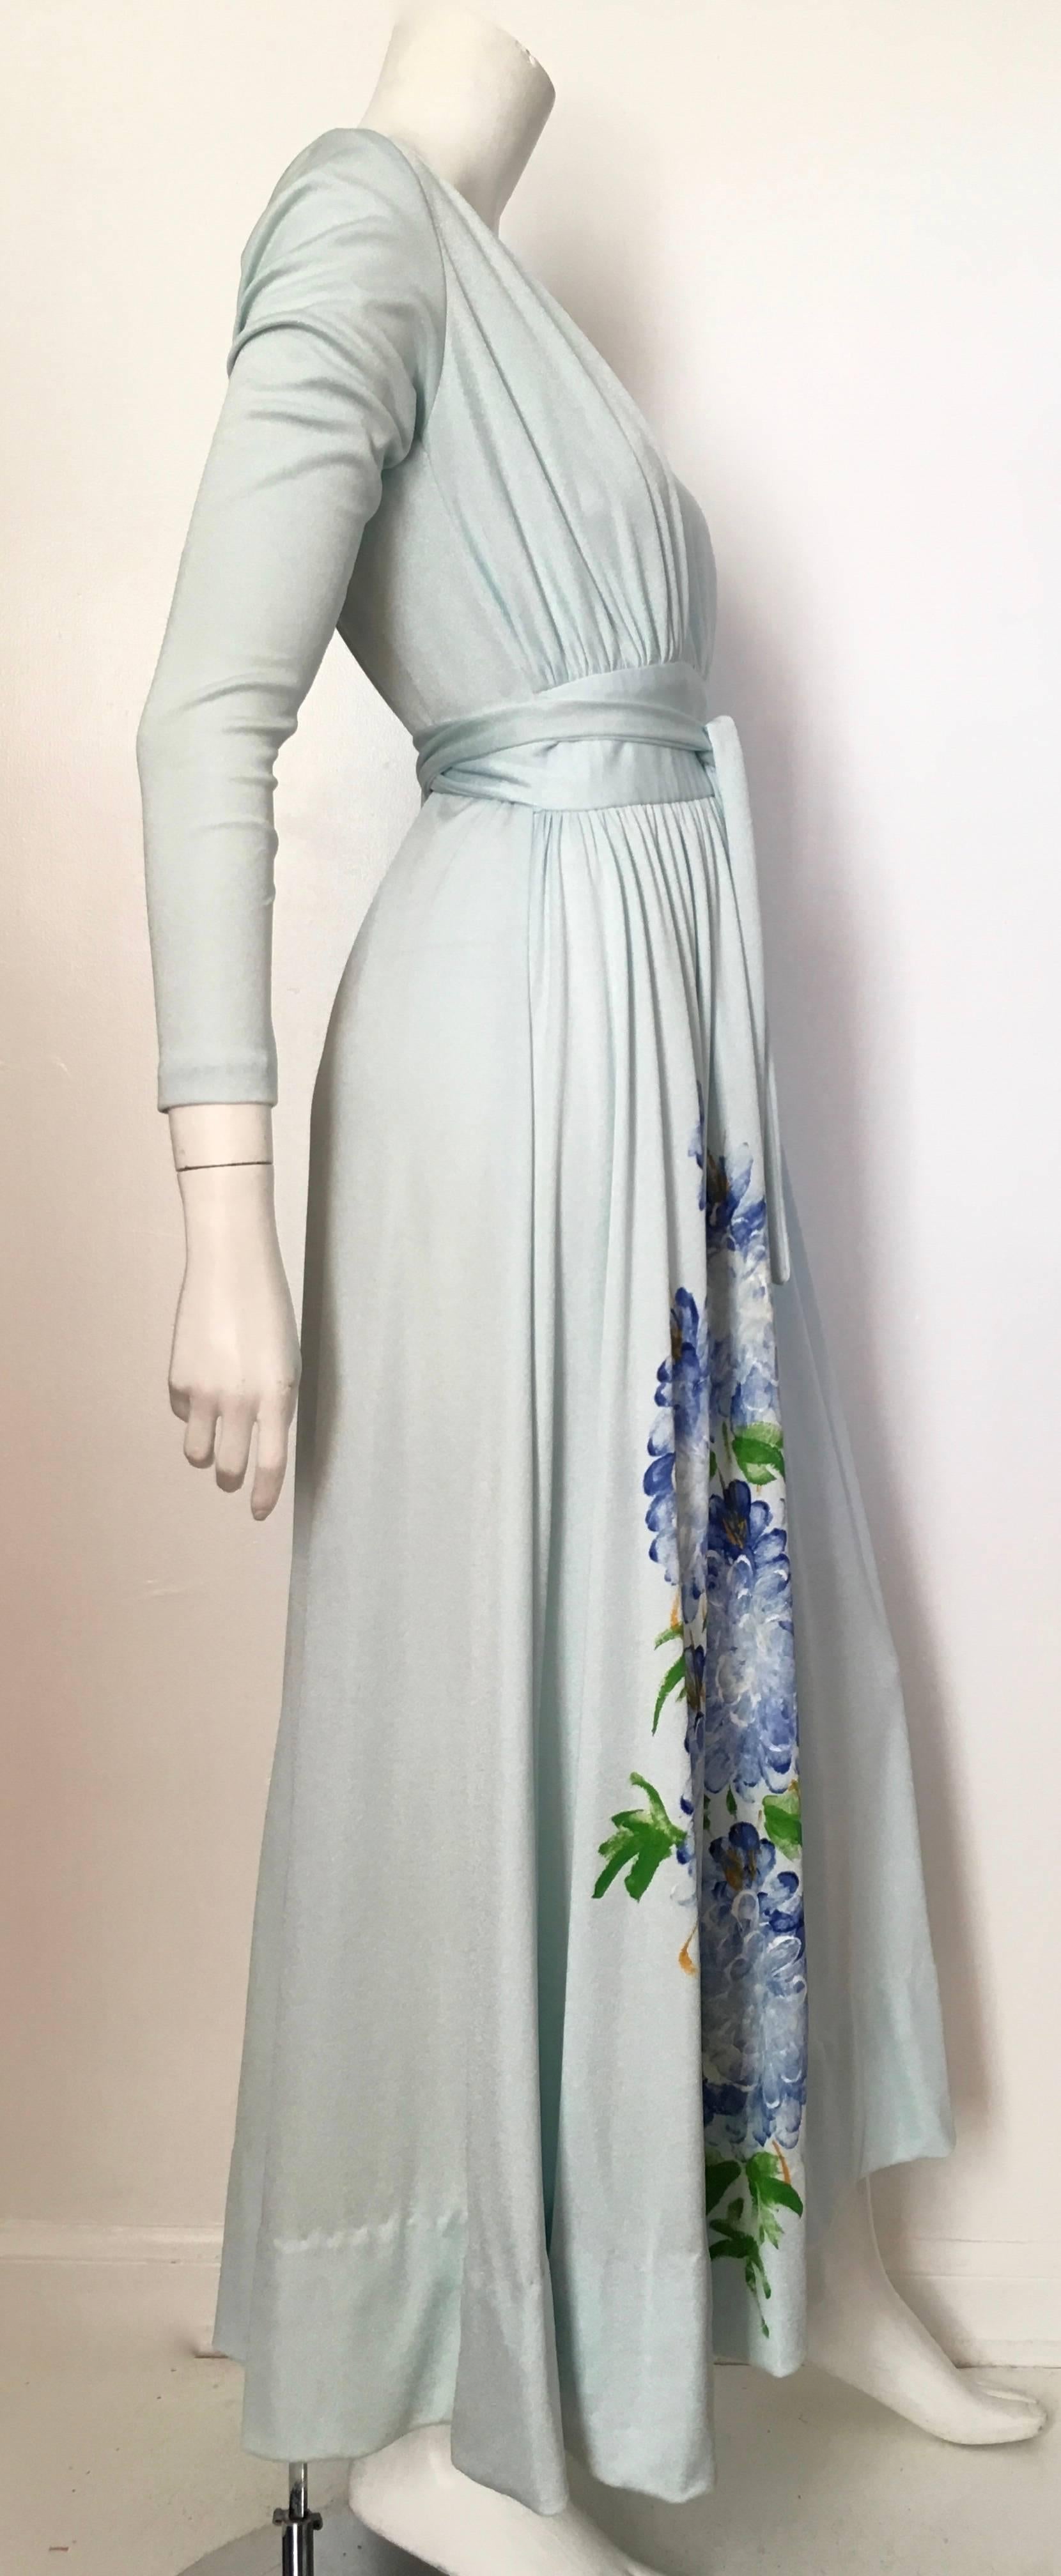 Mimosa Tree 1970s Hand Painted Flowers Aqua Evening Dress Size 6  In Excellent Condition For Sale In Atlanta, GA